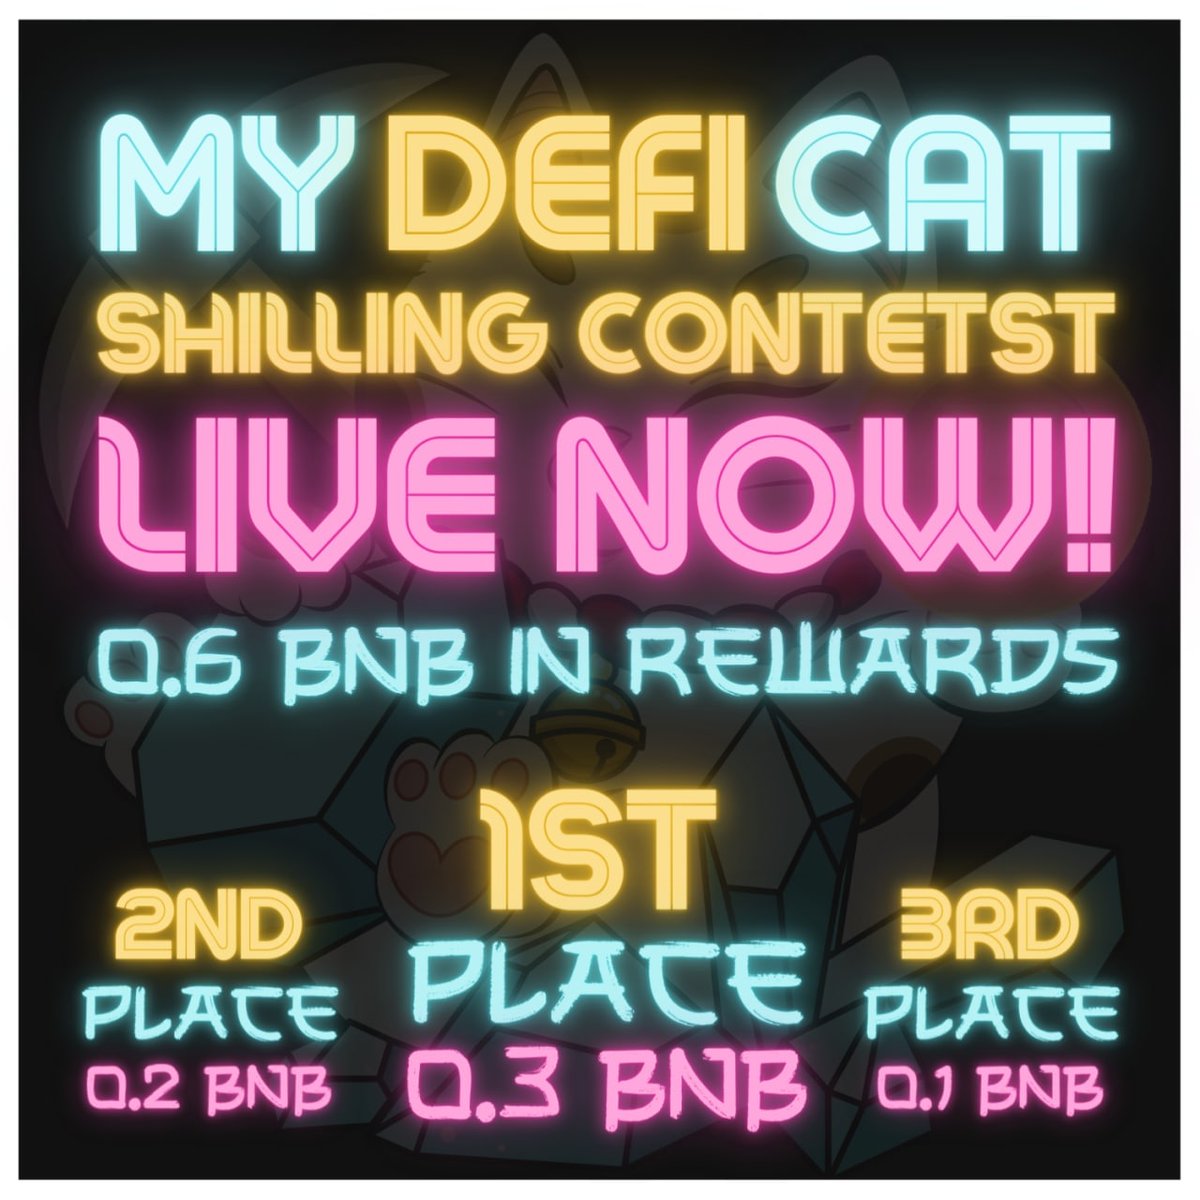 @MyDeFiCat Shilling Contest is LIVE! 0.6 BNB in rewards for the three best shillers! 🥇- 0.3 BNB 🥈- 0.2 BNB 🥉- 0.1 BNB ⚠️ Join this group to find shilling post templates: t.me/MDCShillingCon… More info can be found in our TG group: t.me/MyDefiCat #Giveaway